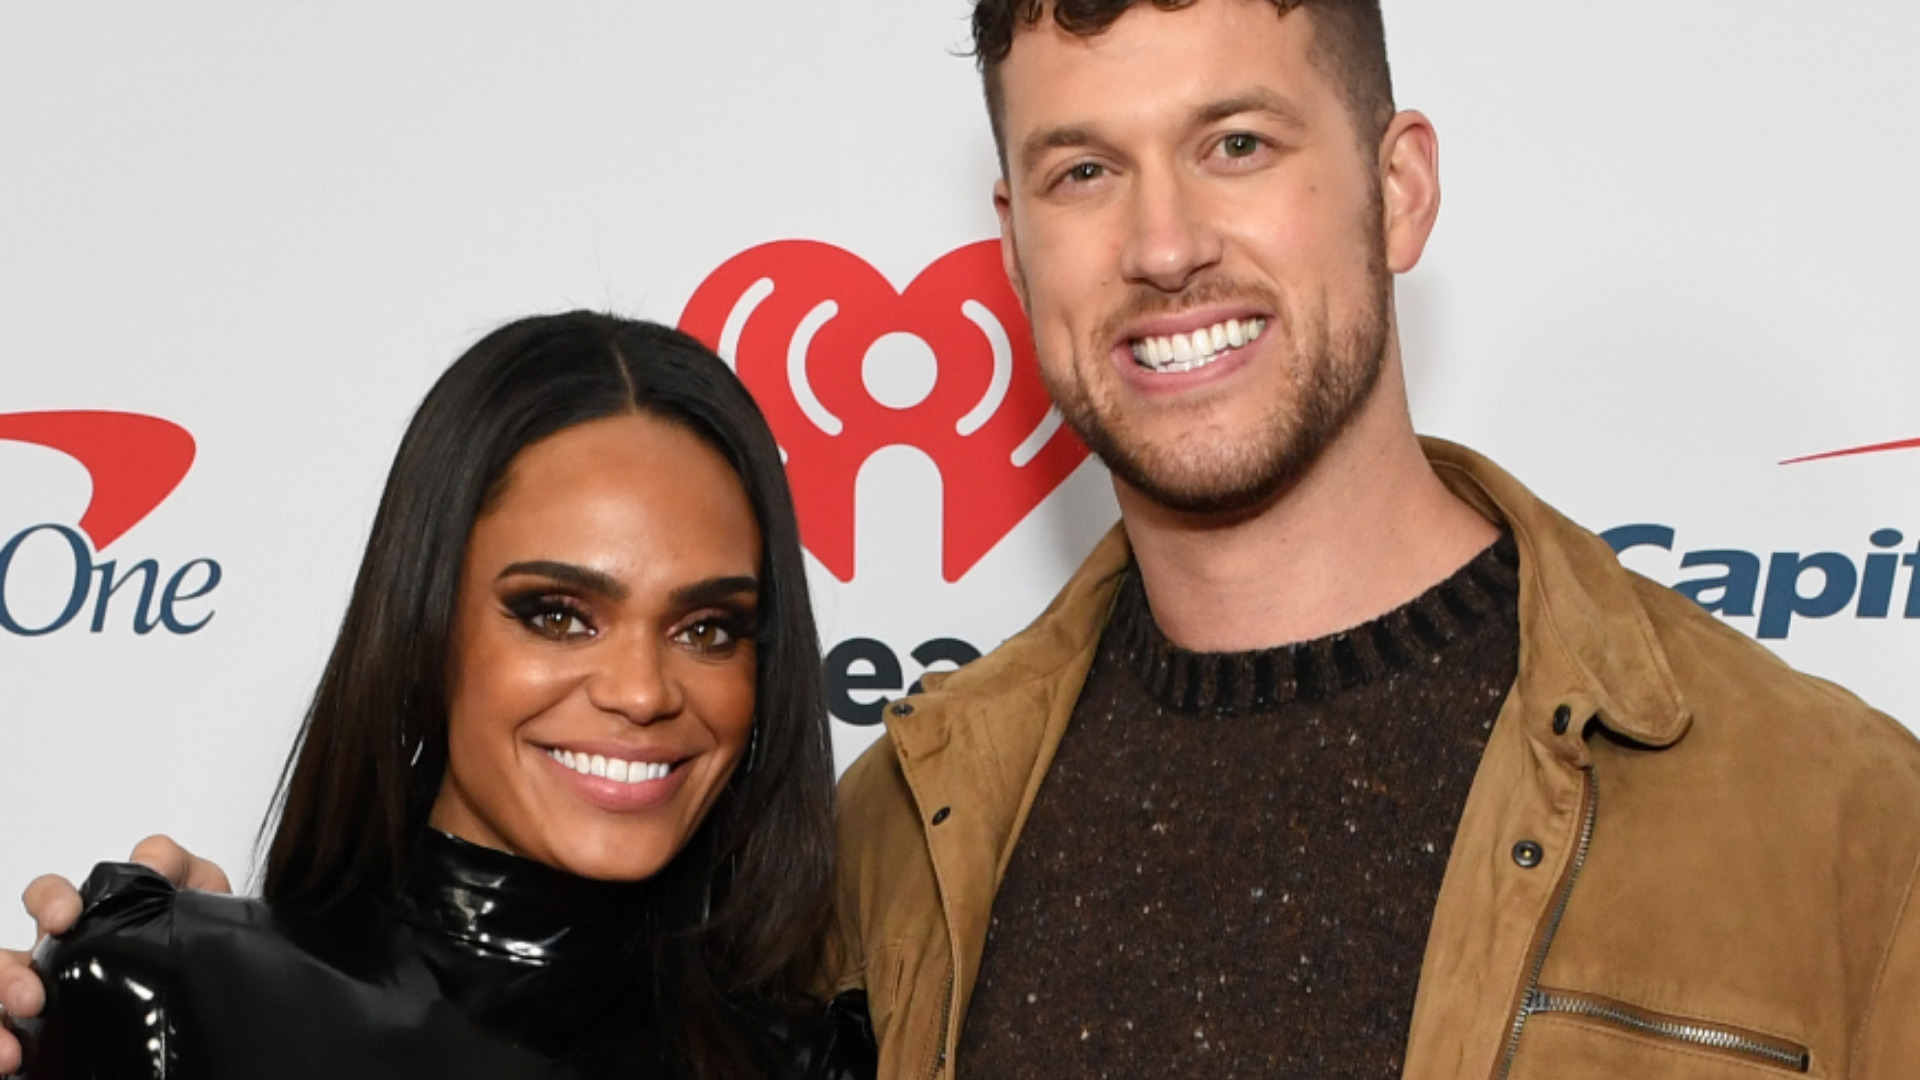 ‘The Bachelorette’ and ‘The Bachelor’ stars Michelle Young and Clayton Echard pose together at Jingle Ball 2021